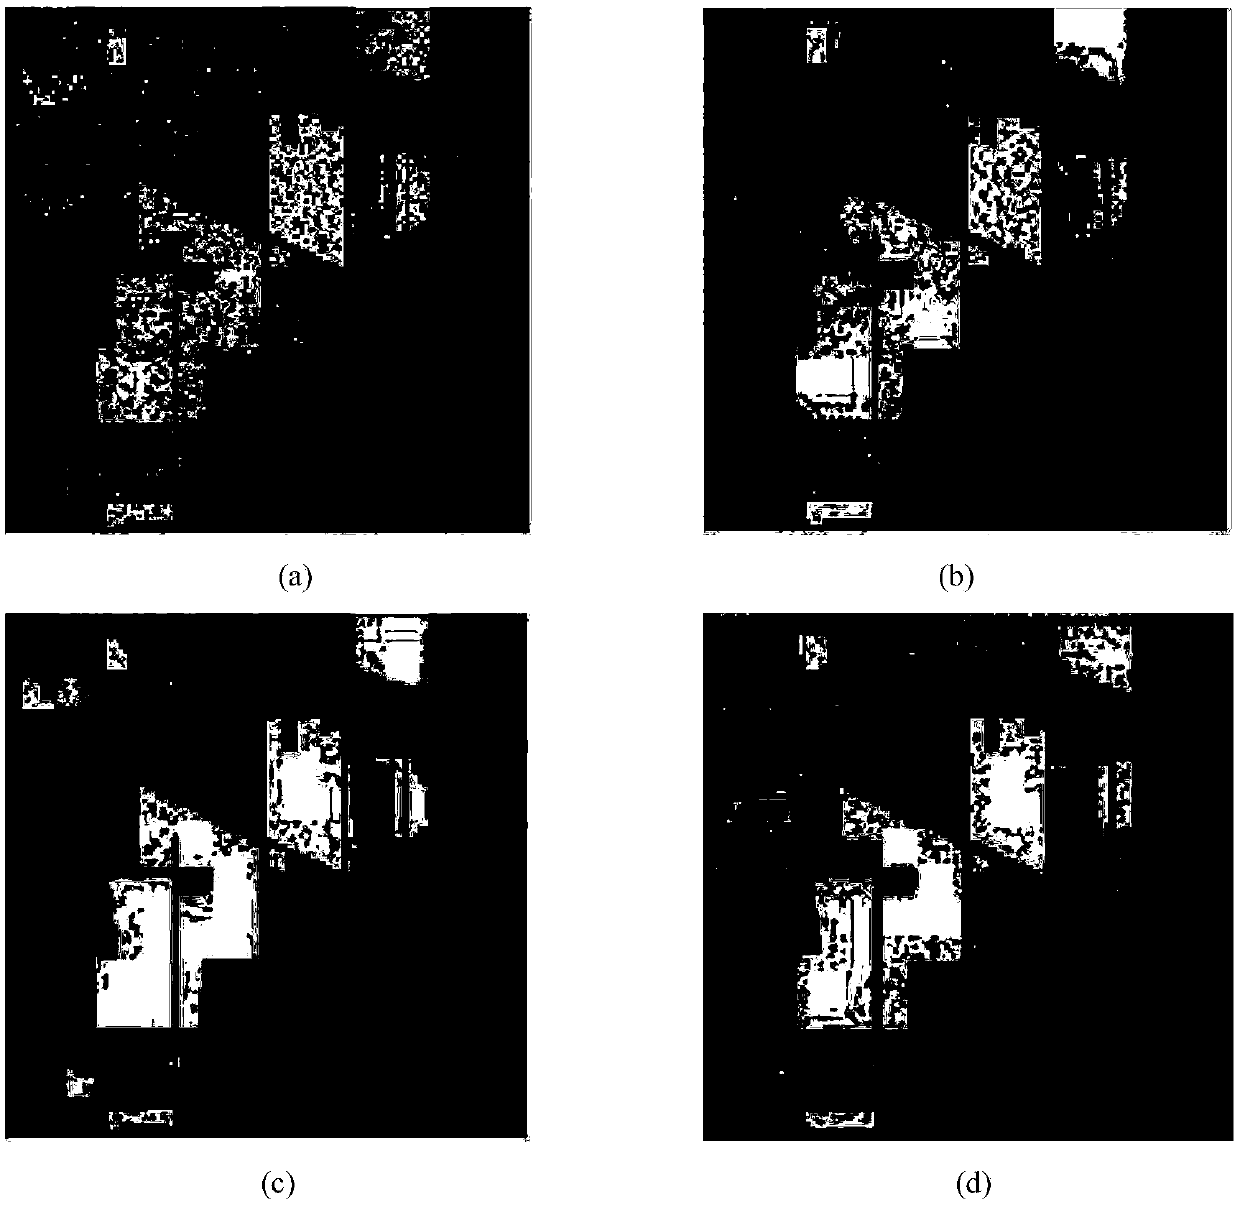 Hyperspectral Image Classification Method Based on 3D Non-local Mean Filtering